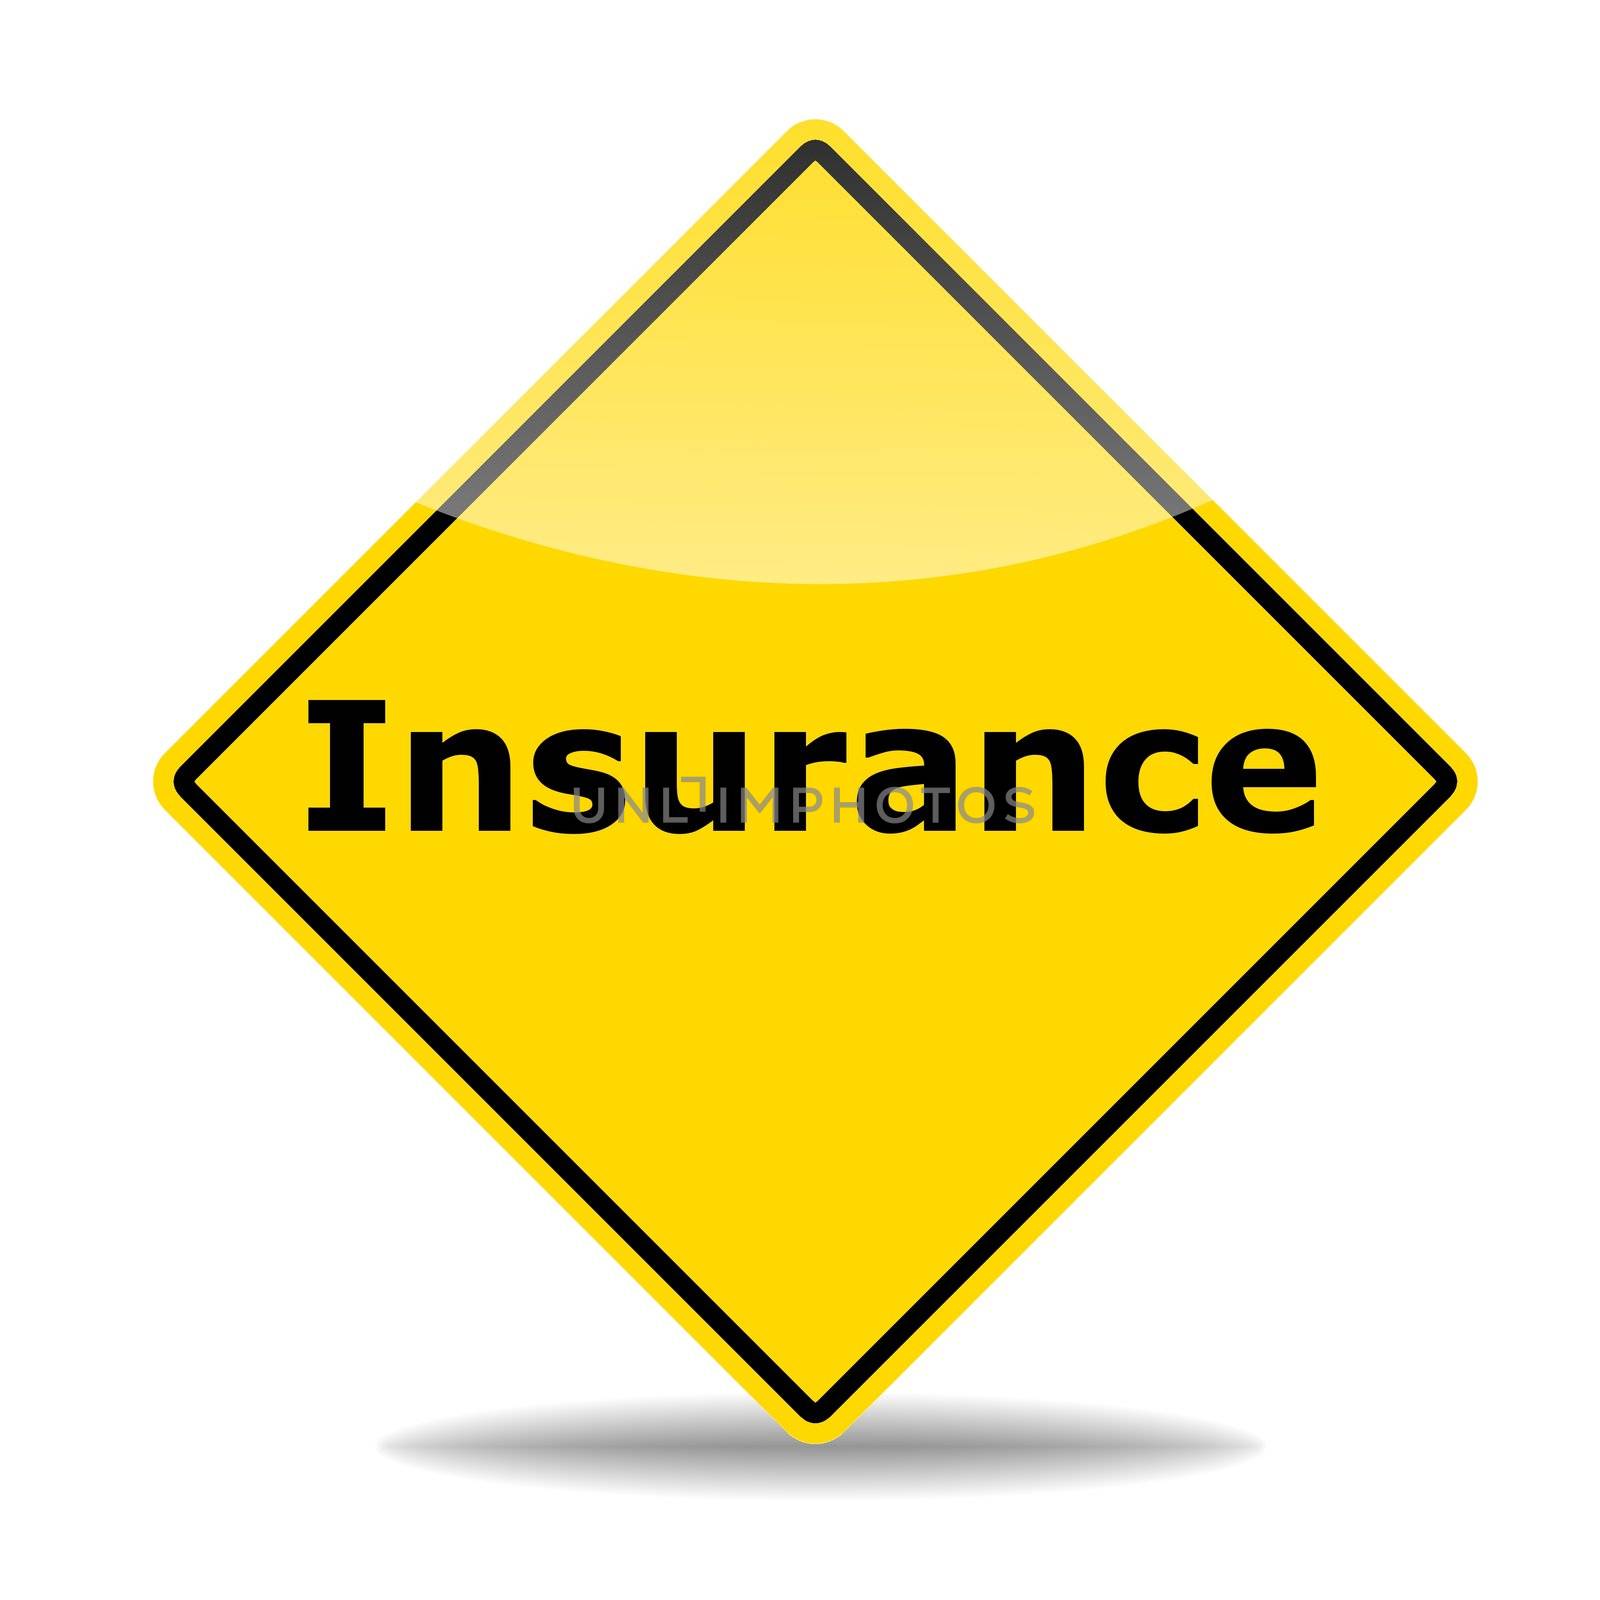 insurance or damage concept with road sign isolated on white background